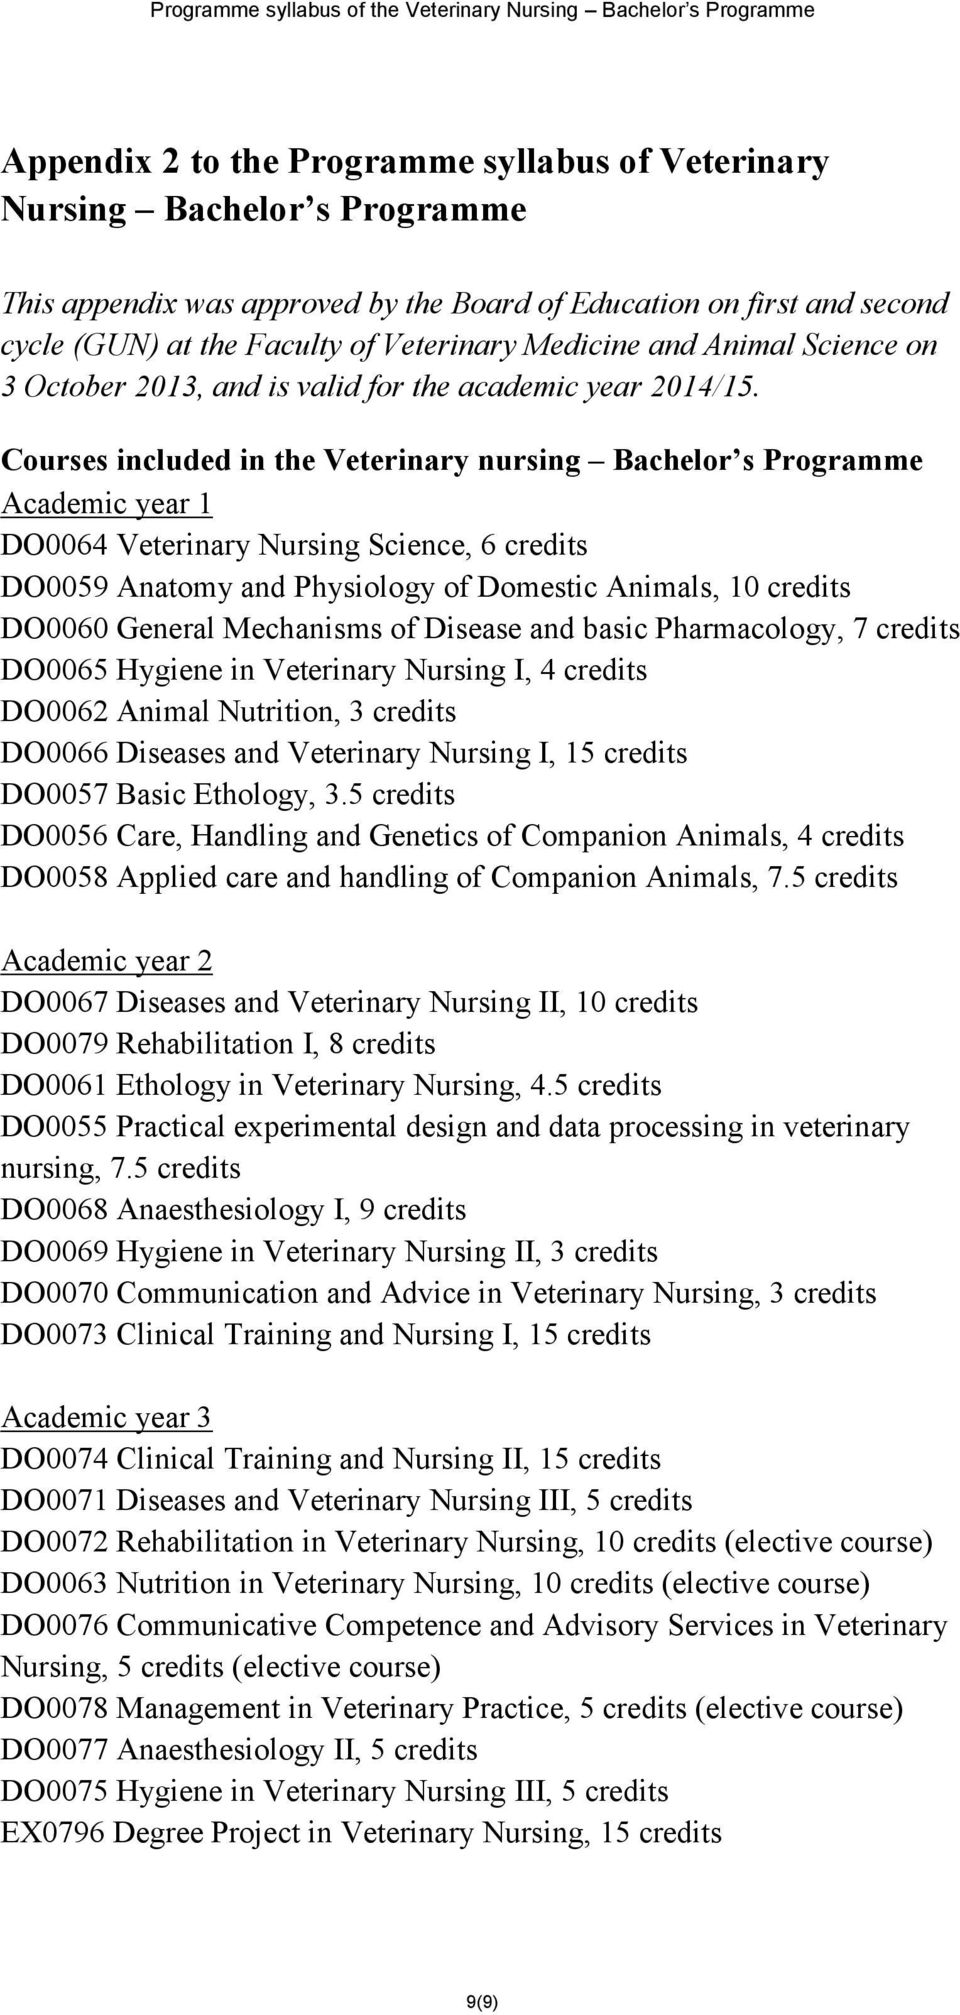 Courses included in the Veterinary nursing Bachelor s Programme Academic year 1 DO0064 Veterinary Nursing Science, 6 credits DO0059 Anatomy and Physiology of Domestic Animals, 10 credits DO0060